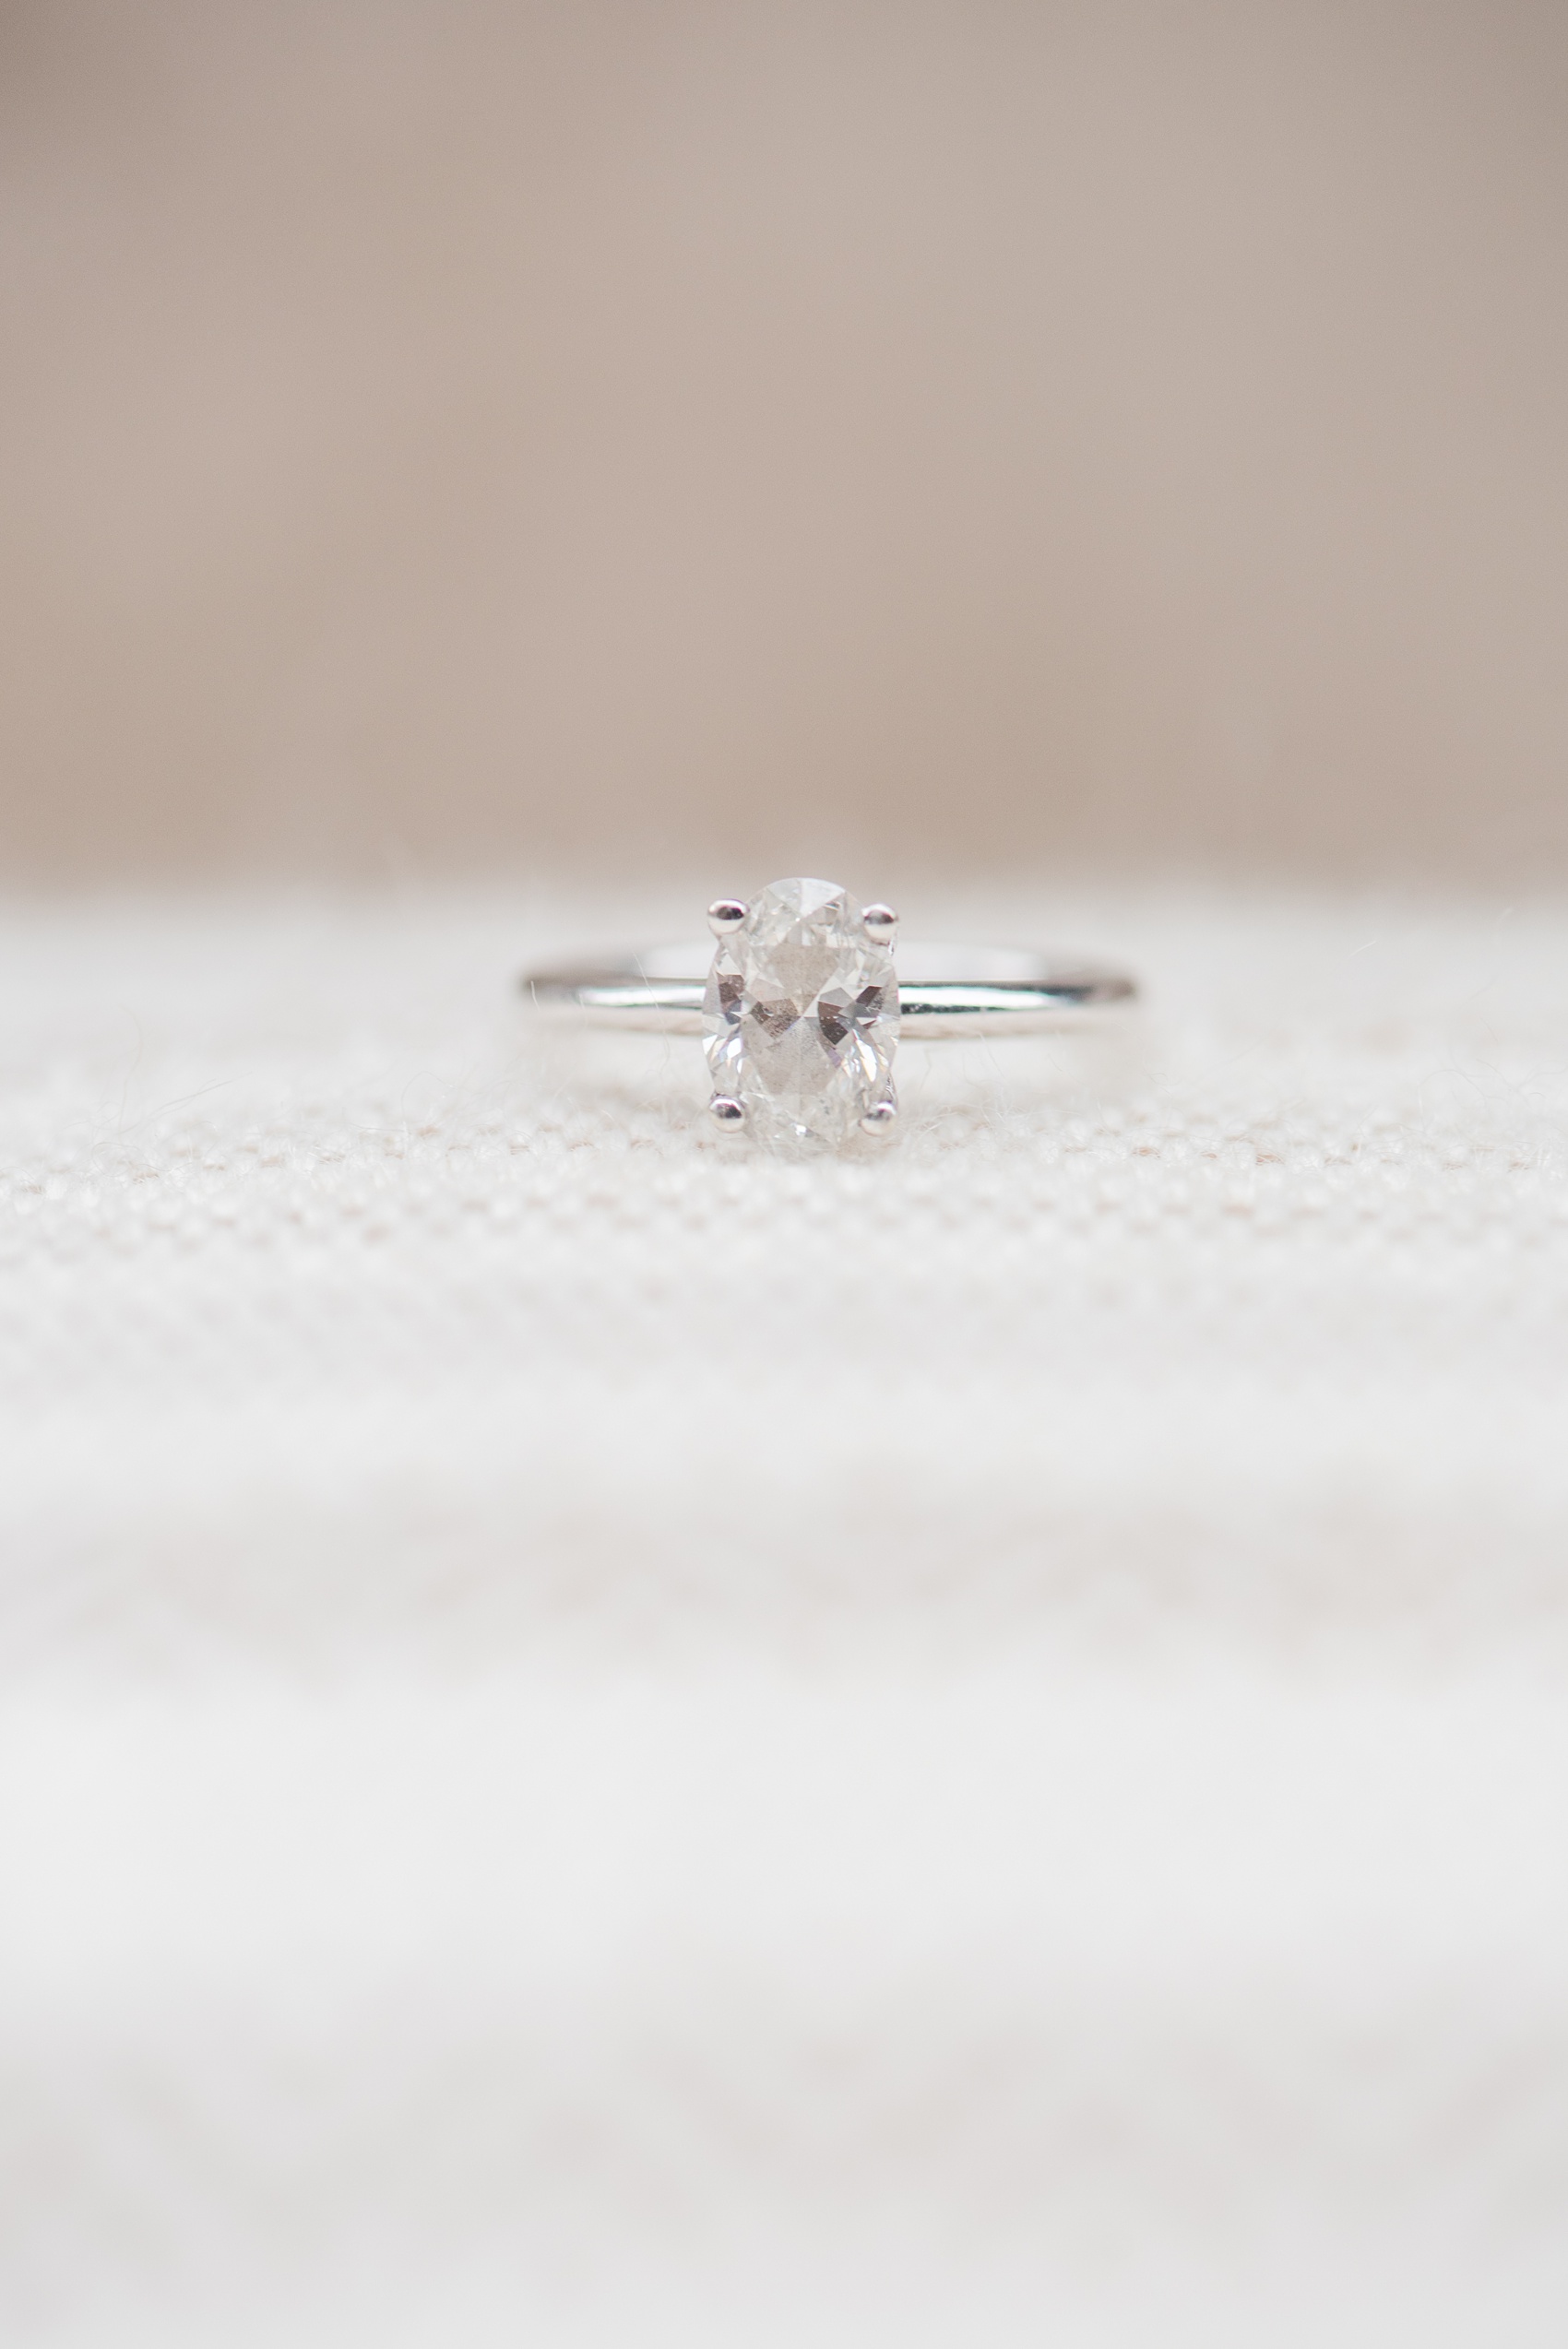 Mikkel Paige Photography pictures of an engagement session in Tribeca. A detail photo of the bride's oval shaped diamond engagement ring.